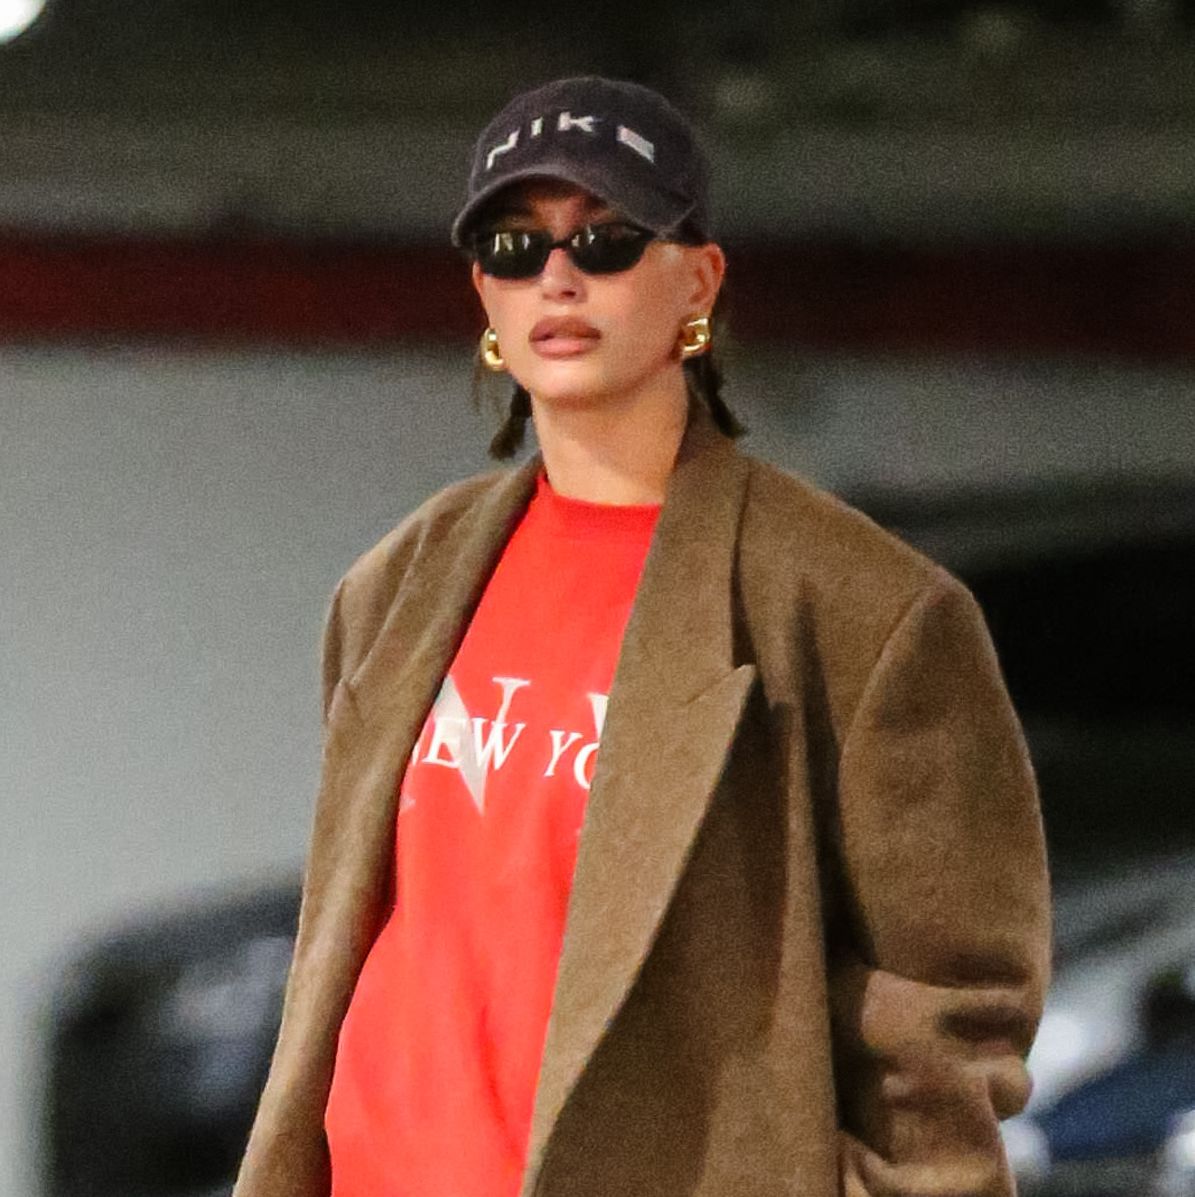 Hailey Bieber Reps The No Pants Trend Again in XXL Coat and Ballet Flats